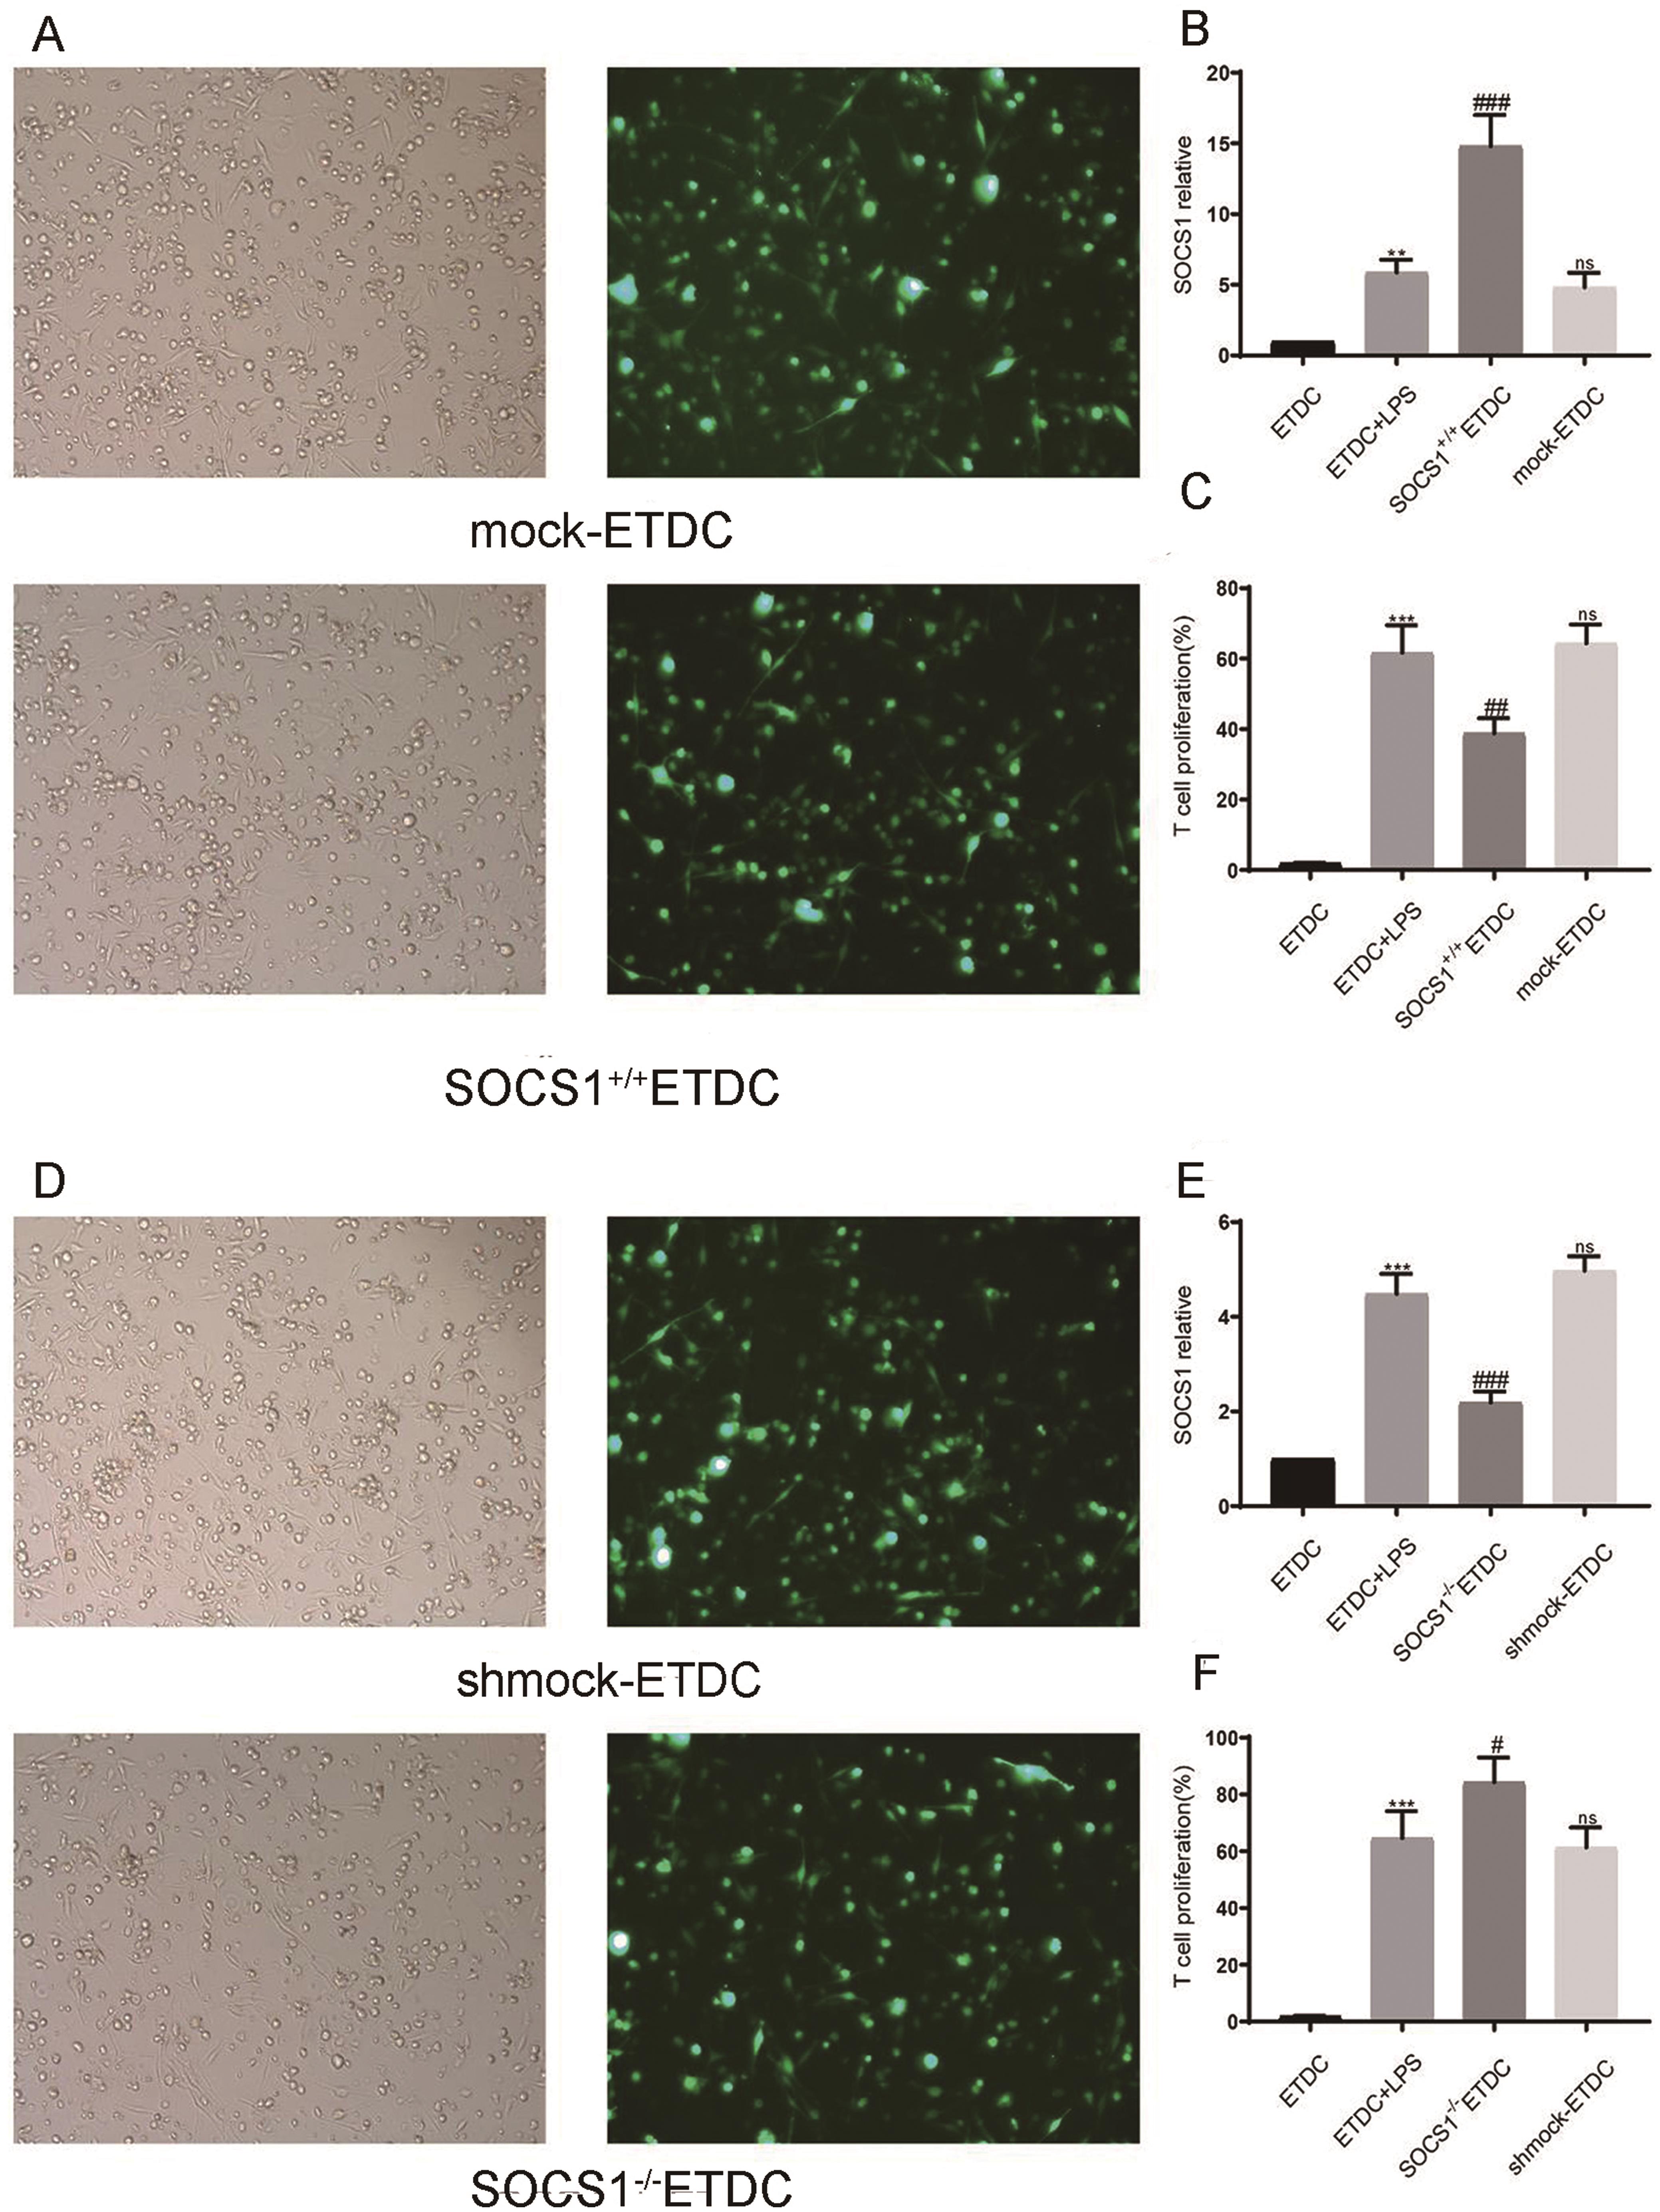 Successful transduction of Ad-SOCS1 and Ad-shSOCS1, and the effect of SOCS1 expression on the allostimulatory ability of ETDCs.